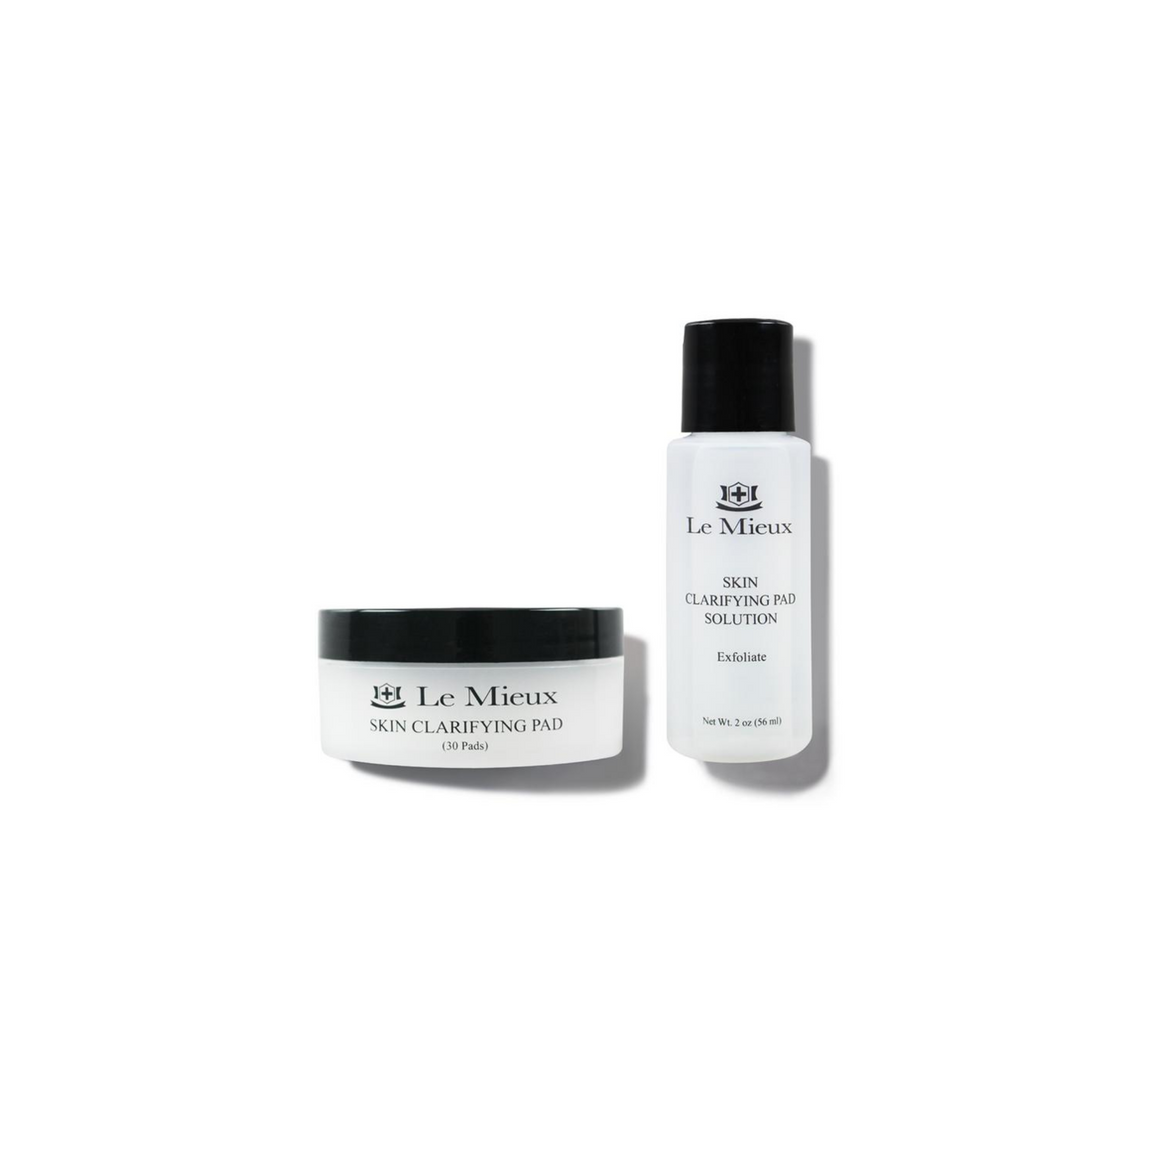 Le Mieux Skin Clarifying Pads  (Acne prone skin treatment)